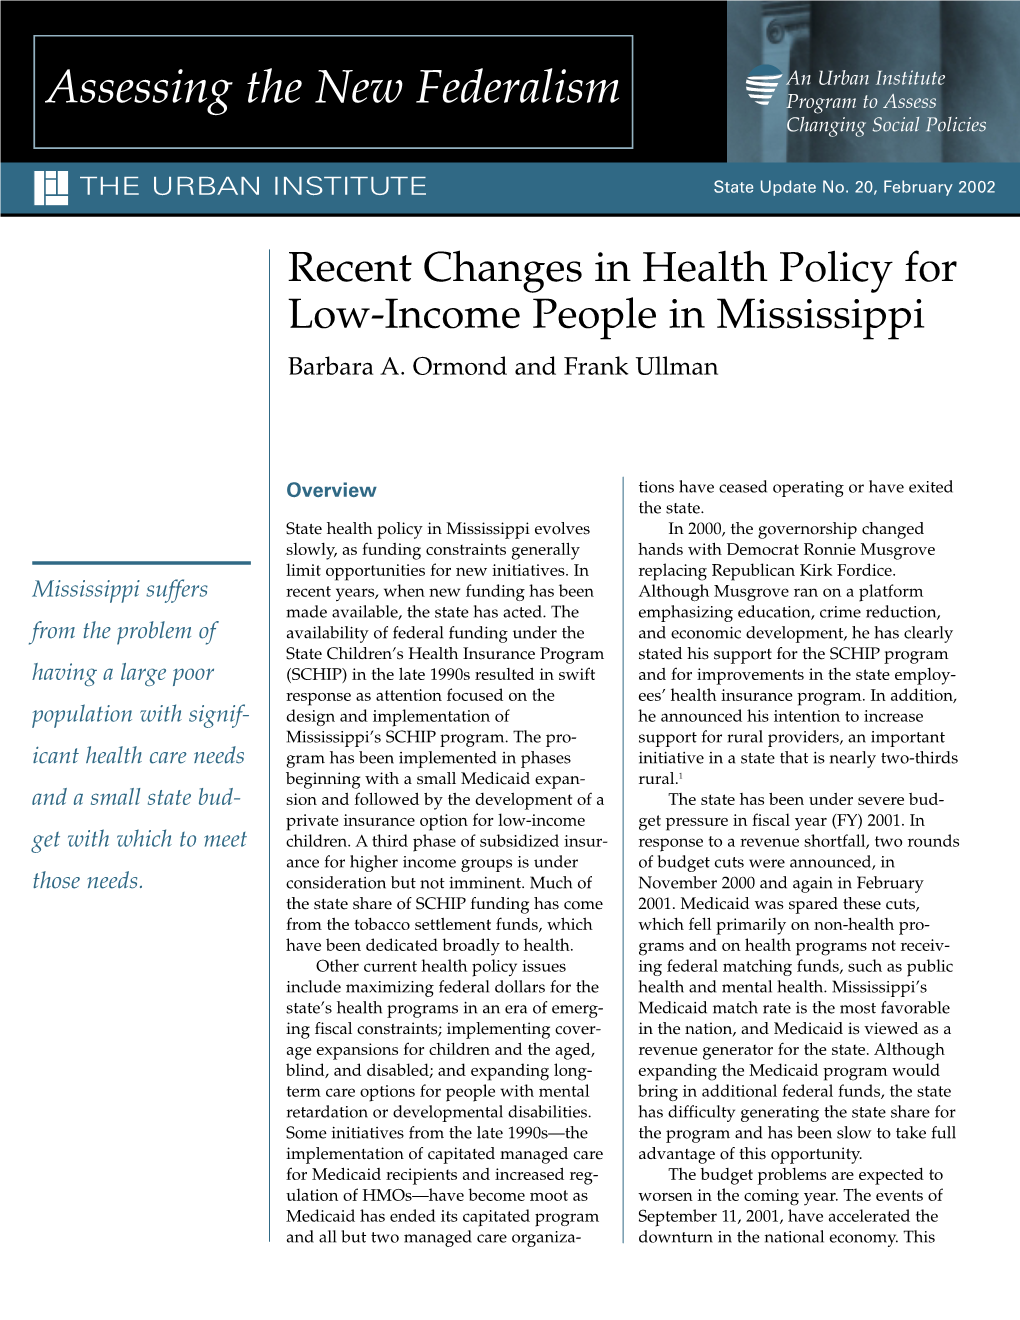 Recent Changes in Health Policy for Low-Income People in Mississippi Barbara A